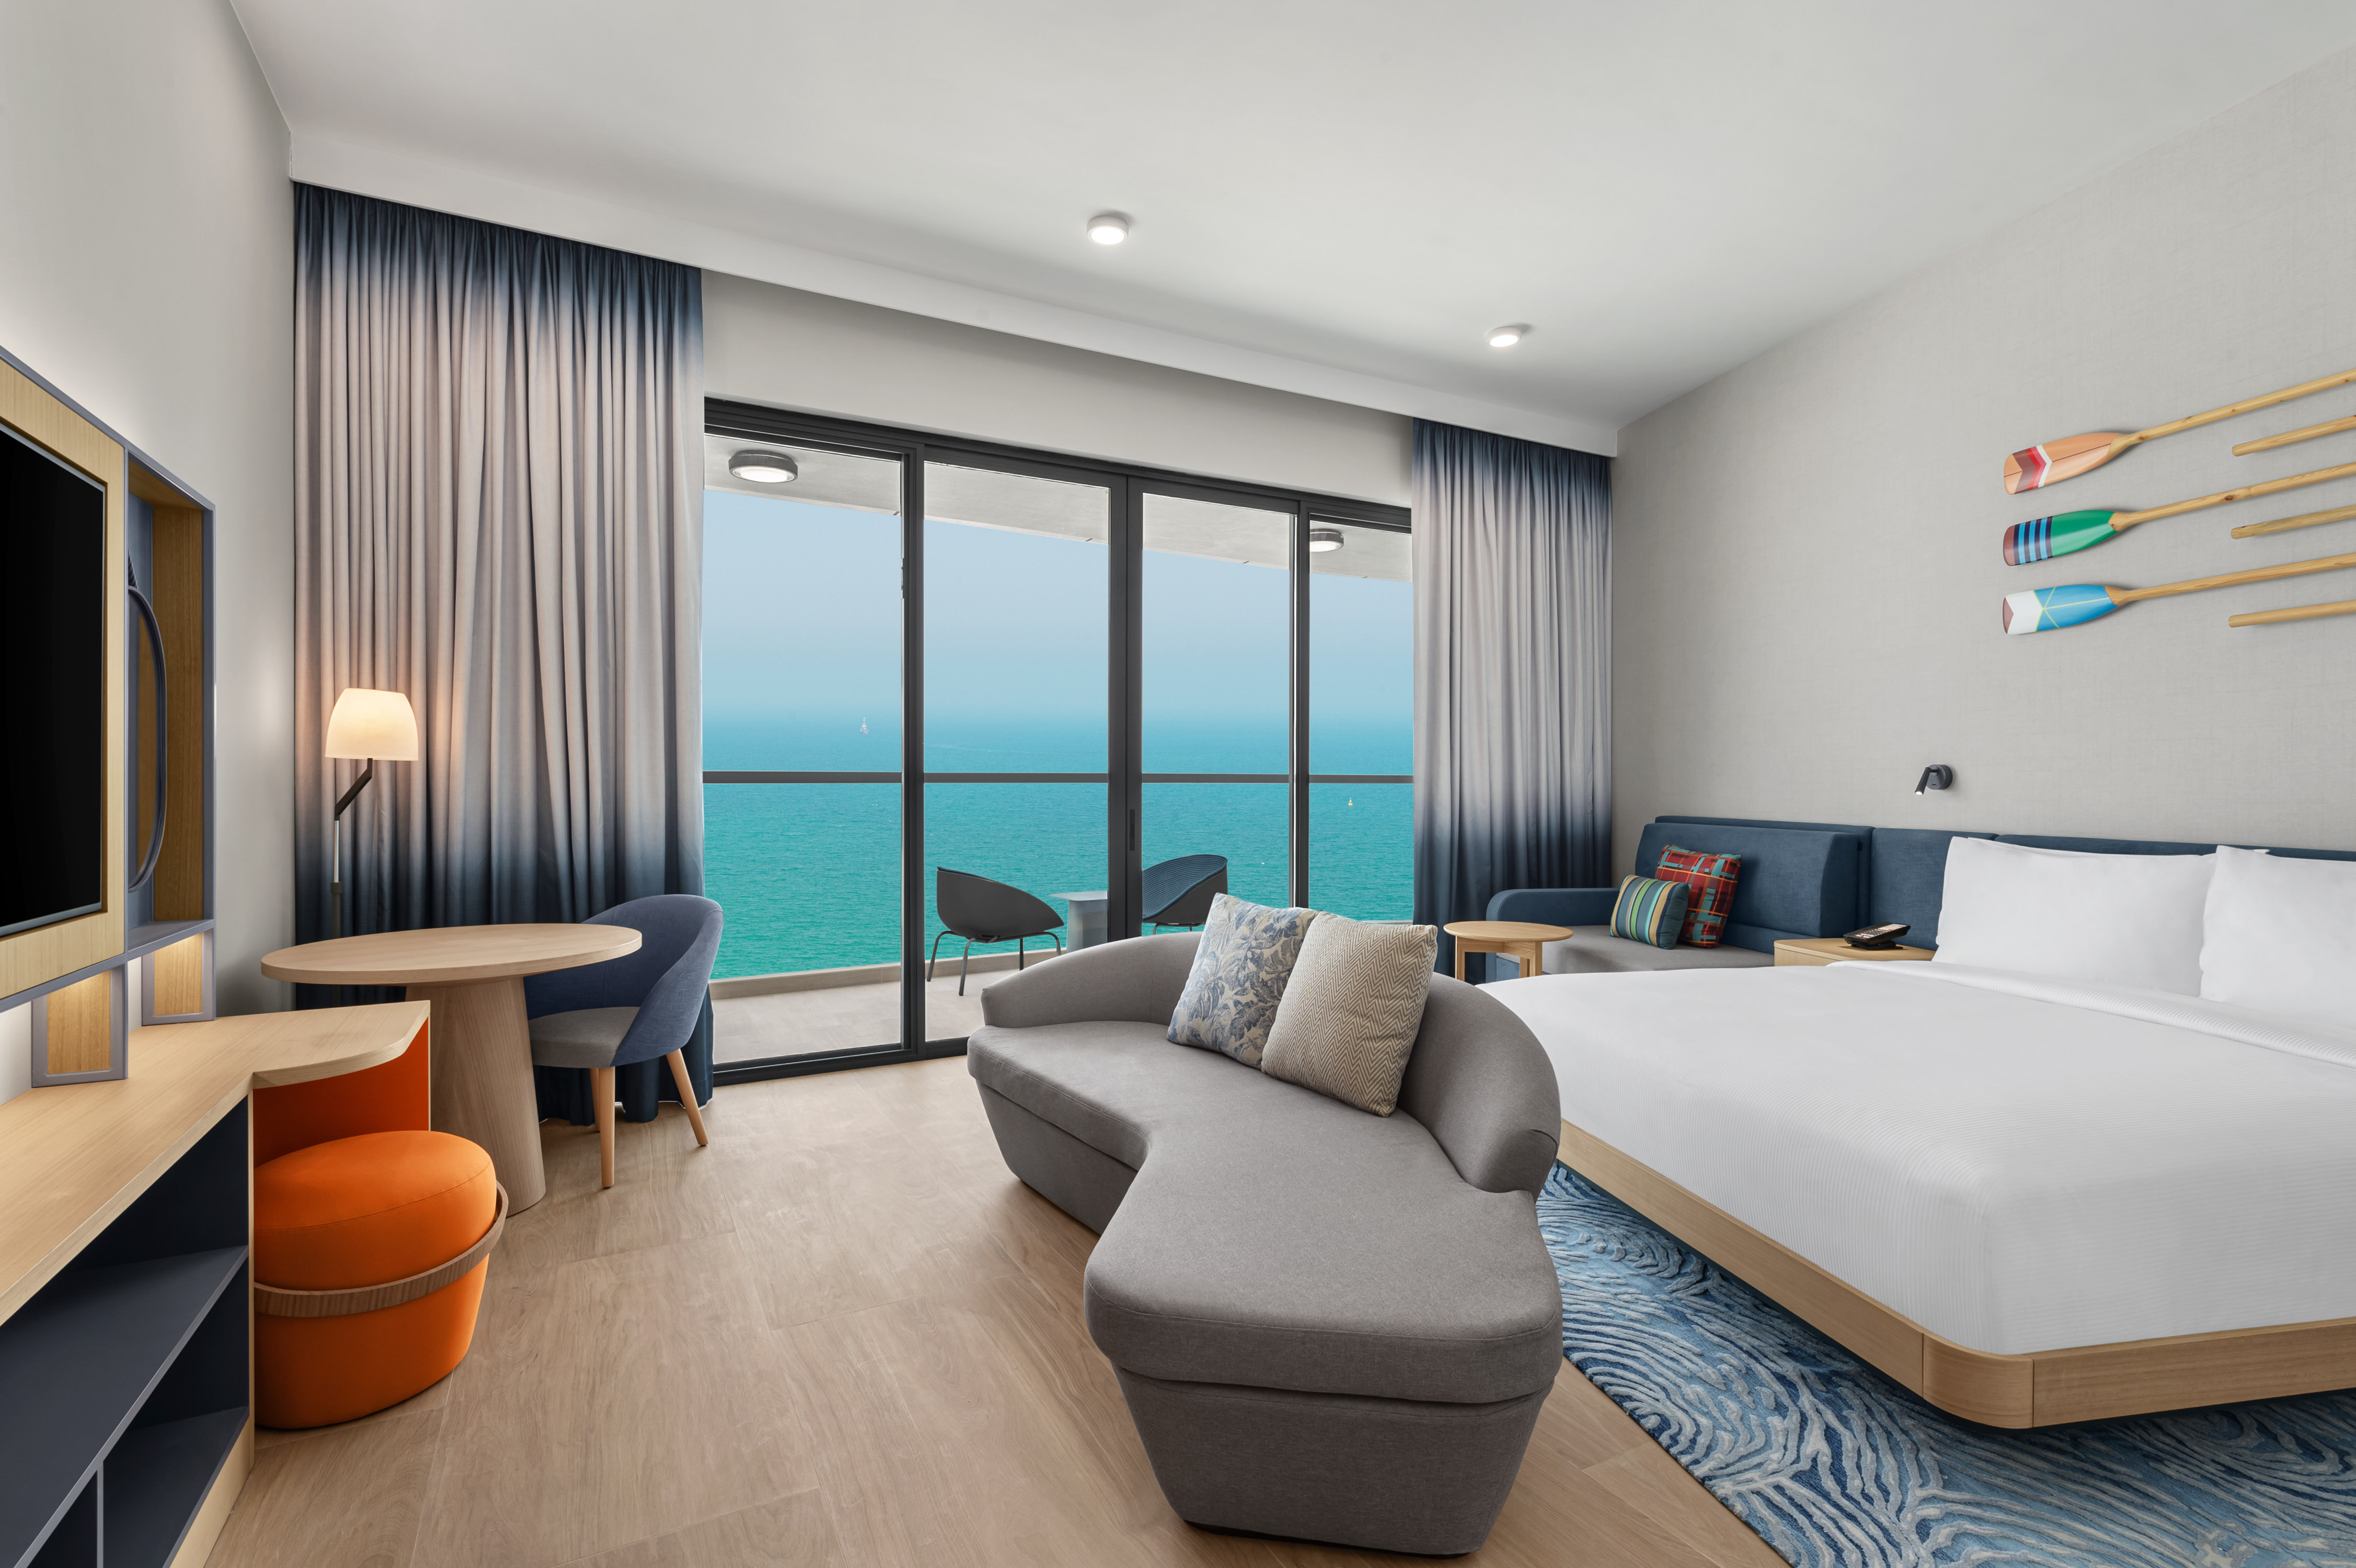 Family Guest Room with Sofa HDTV and Sea View